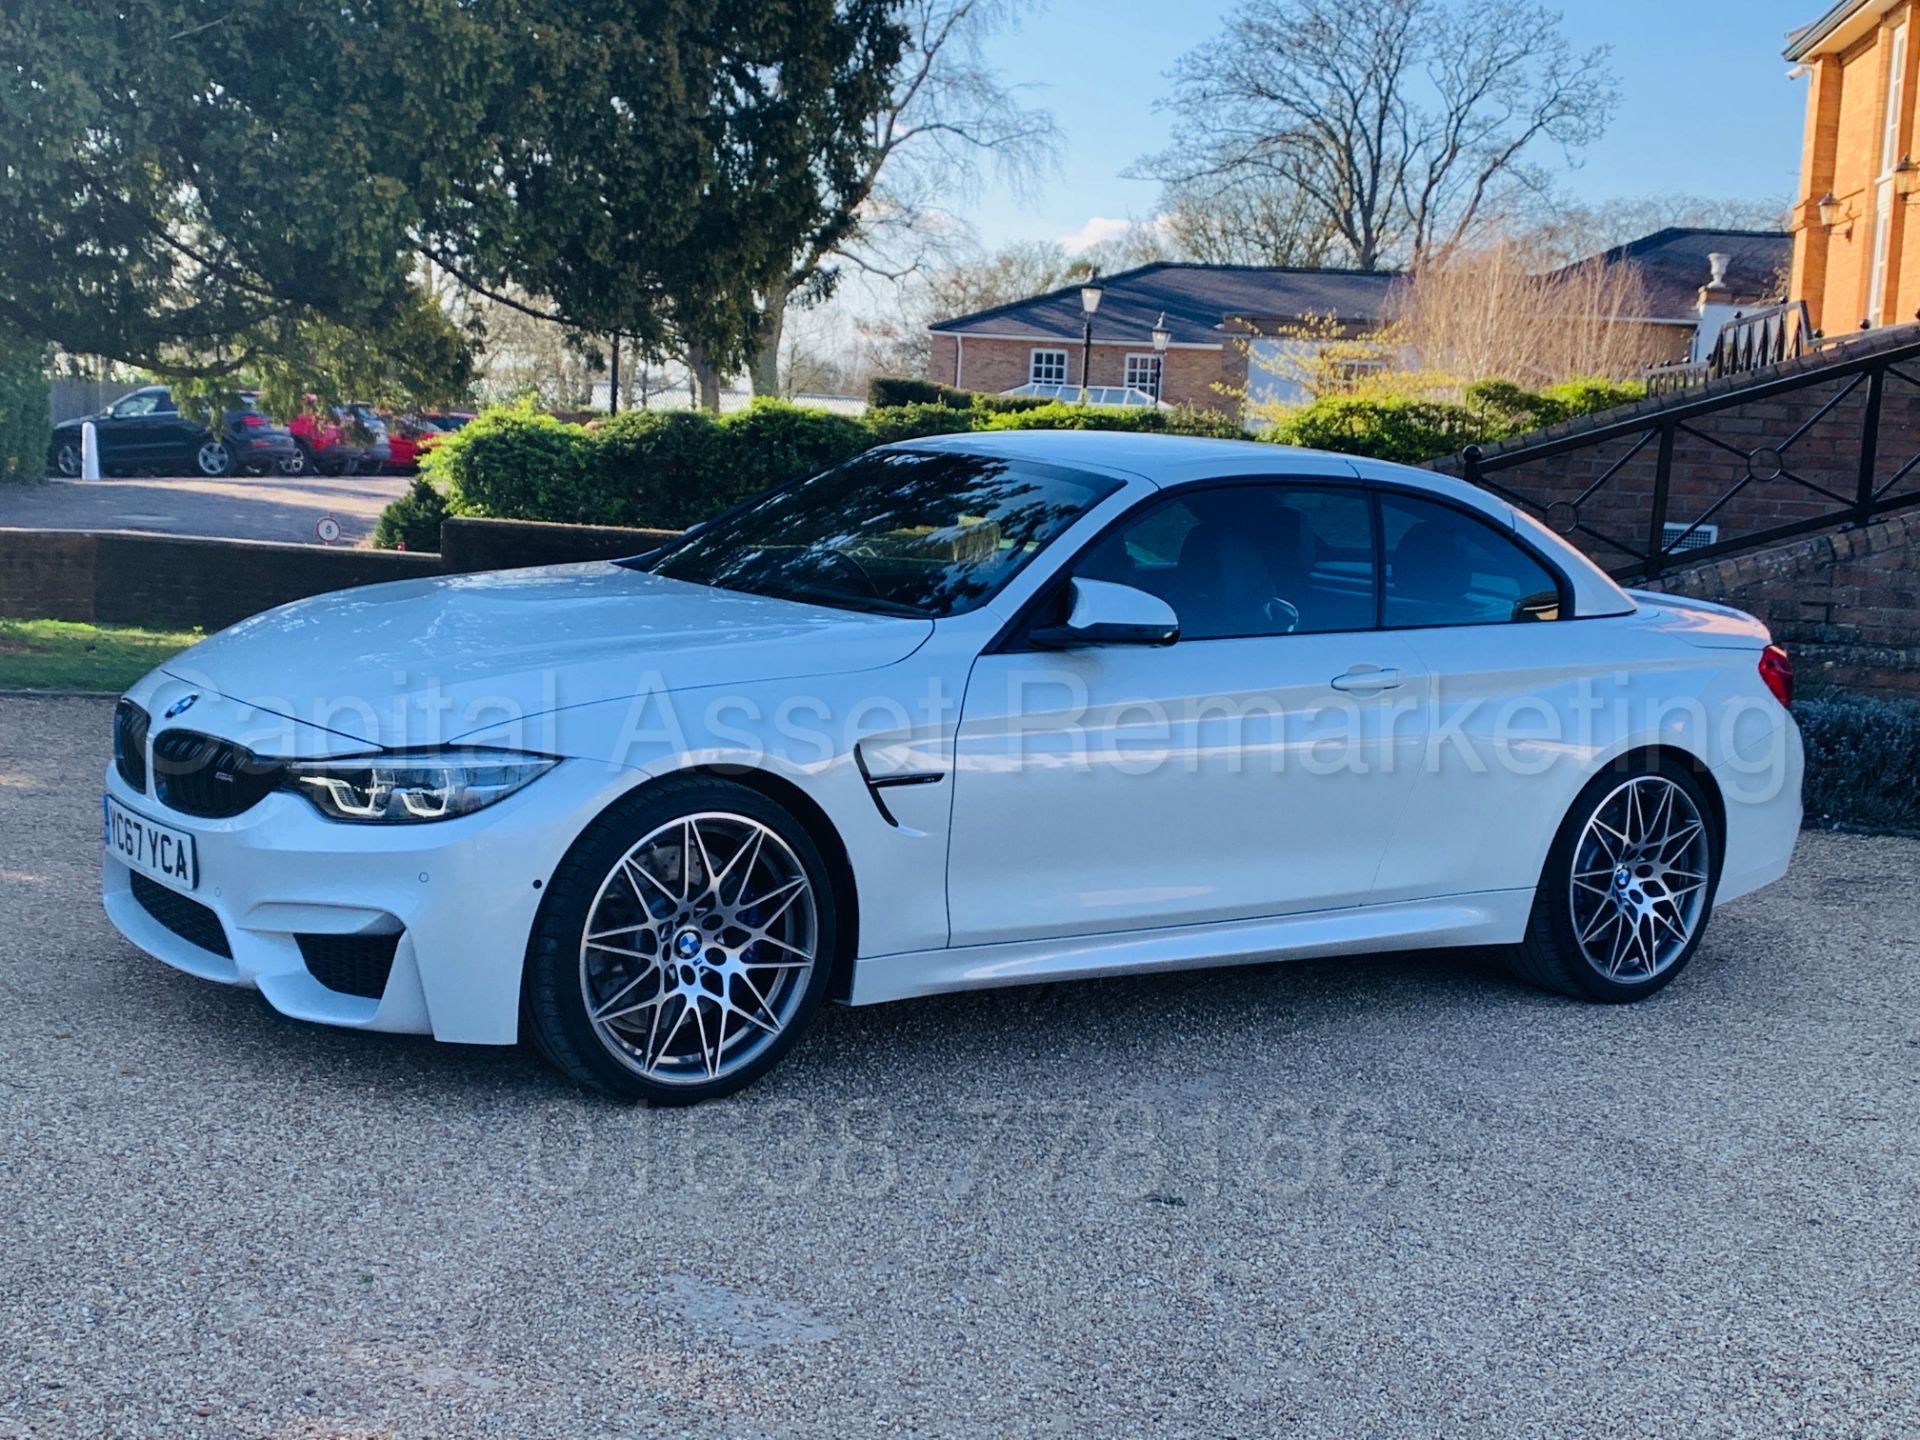 ON SALE BMW M4 CONVERTIBLE *COMPETITION PACKAGE* (2018 MODEL) '431 BHP - M DCT AUTO' WOW!!!!! - Image 2 of 89